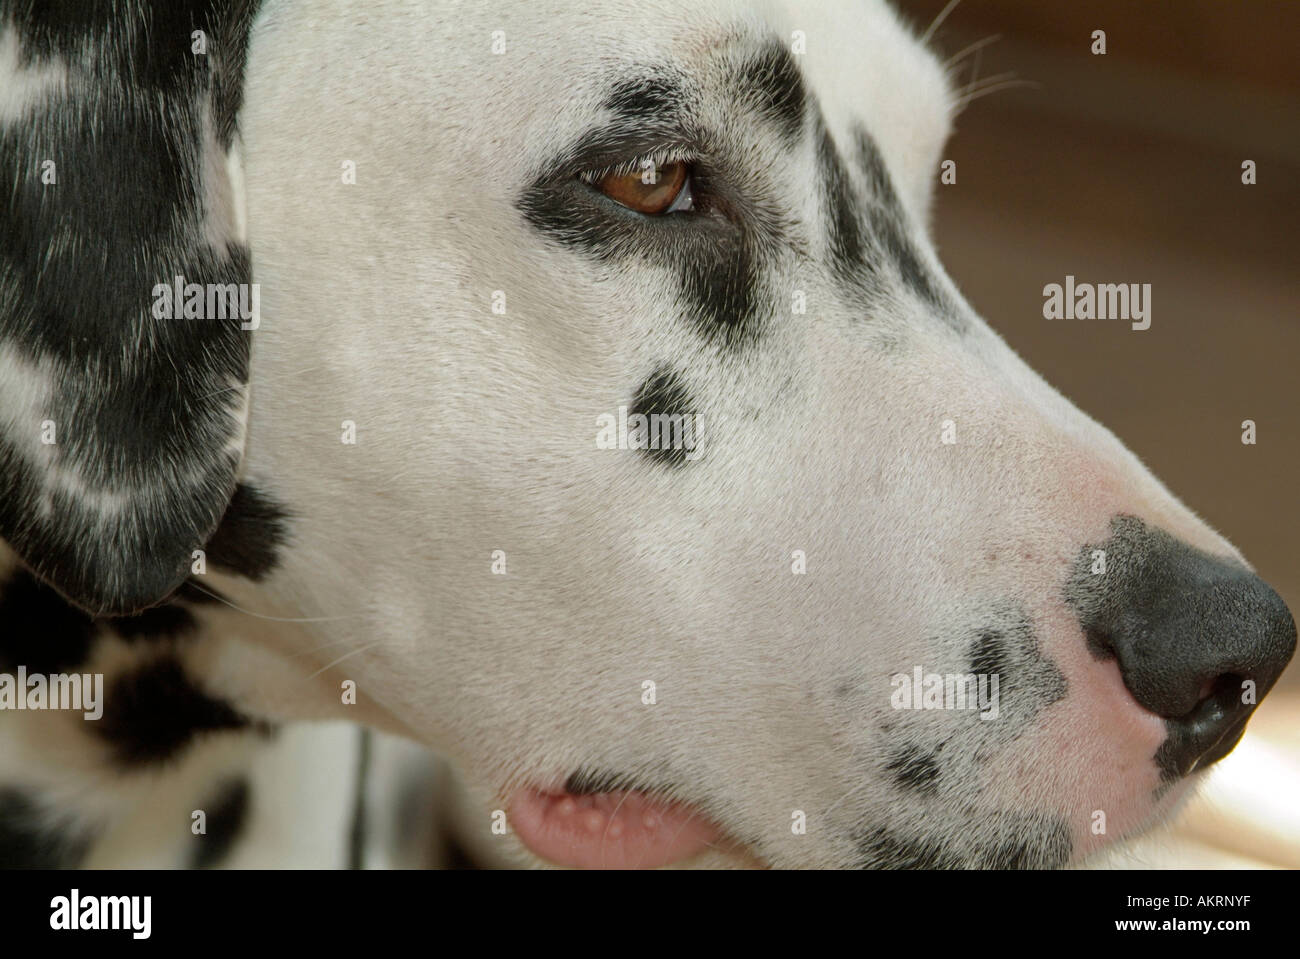 portrait dog Dalmatian side view from head with a look for searching Stock Photo